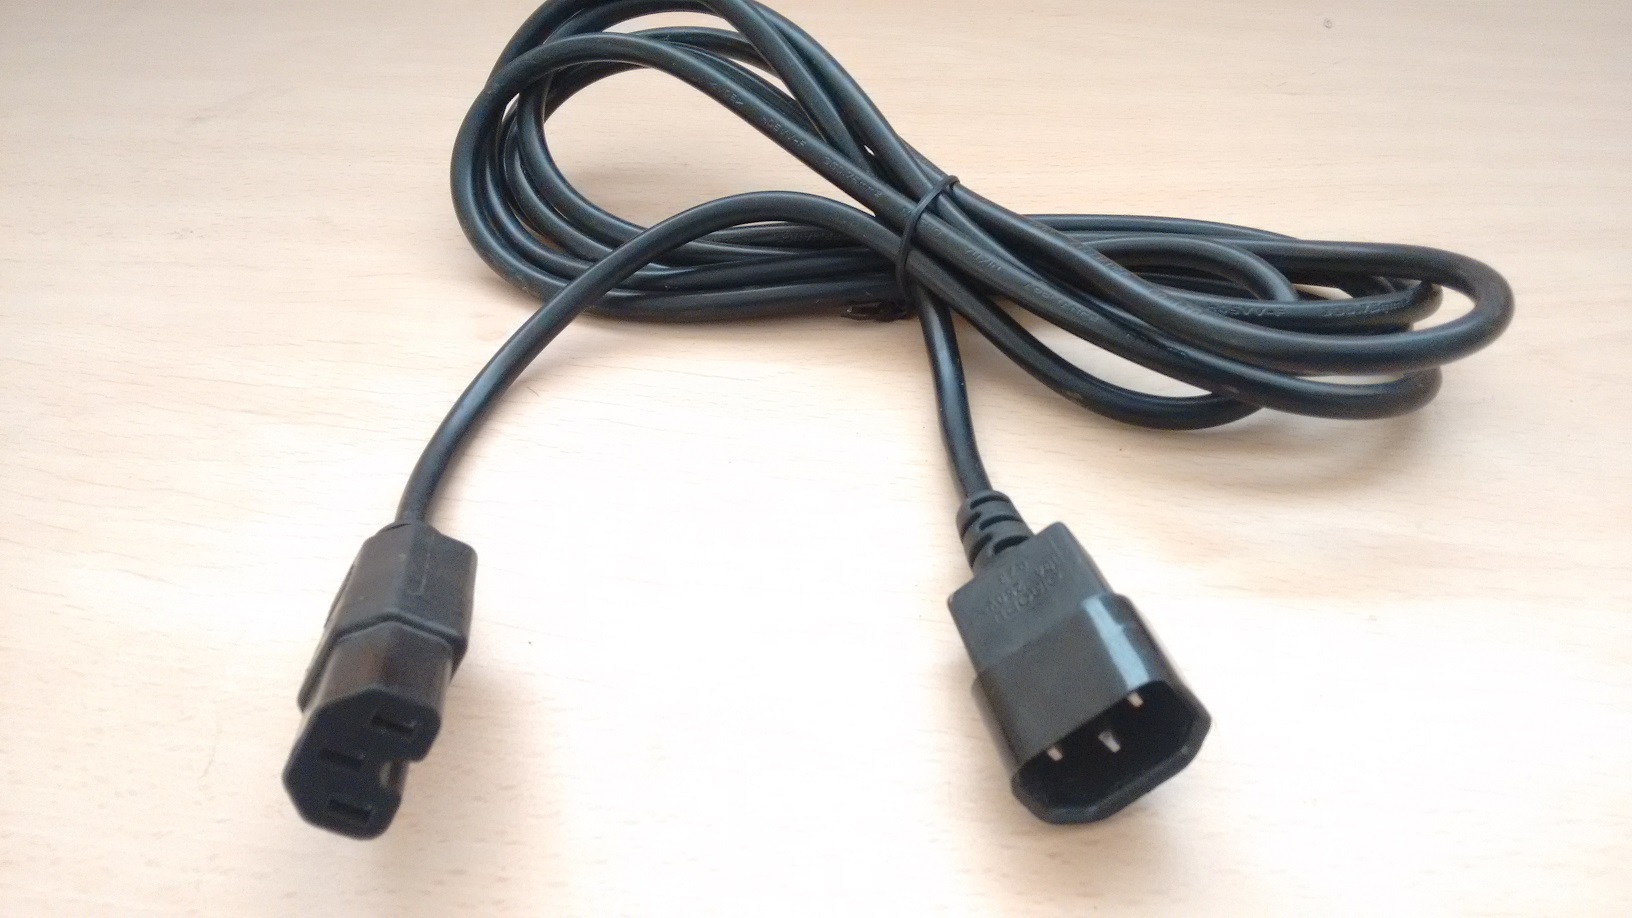 AC Power Cord C14 Plug to C15 Connector